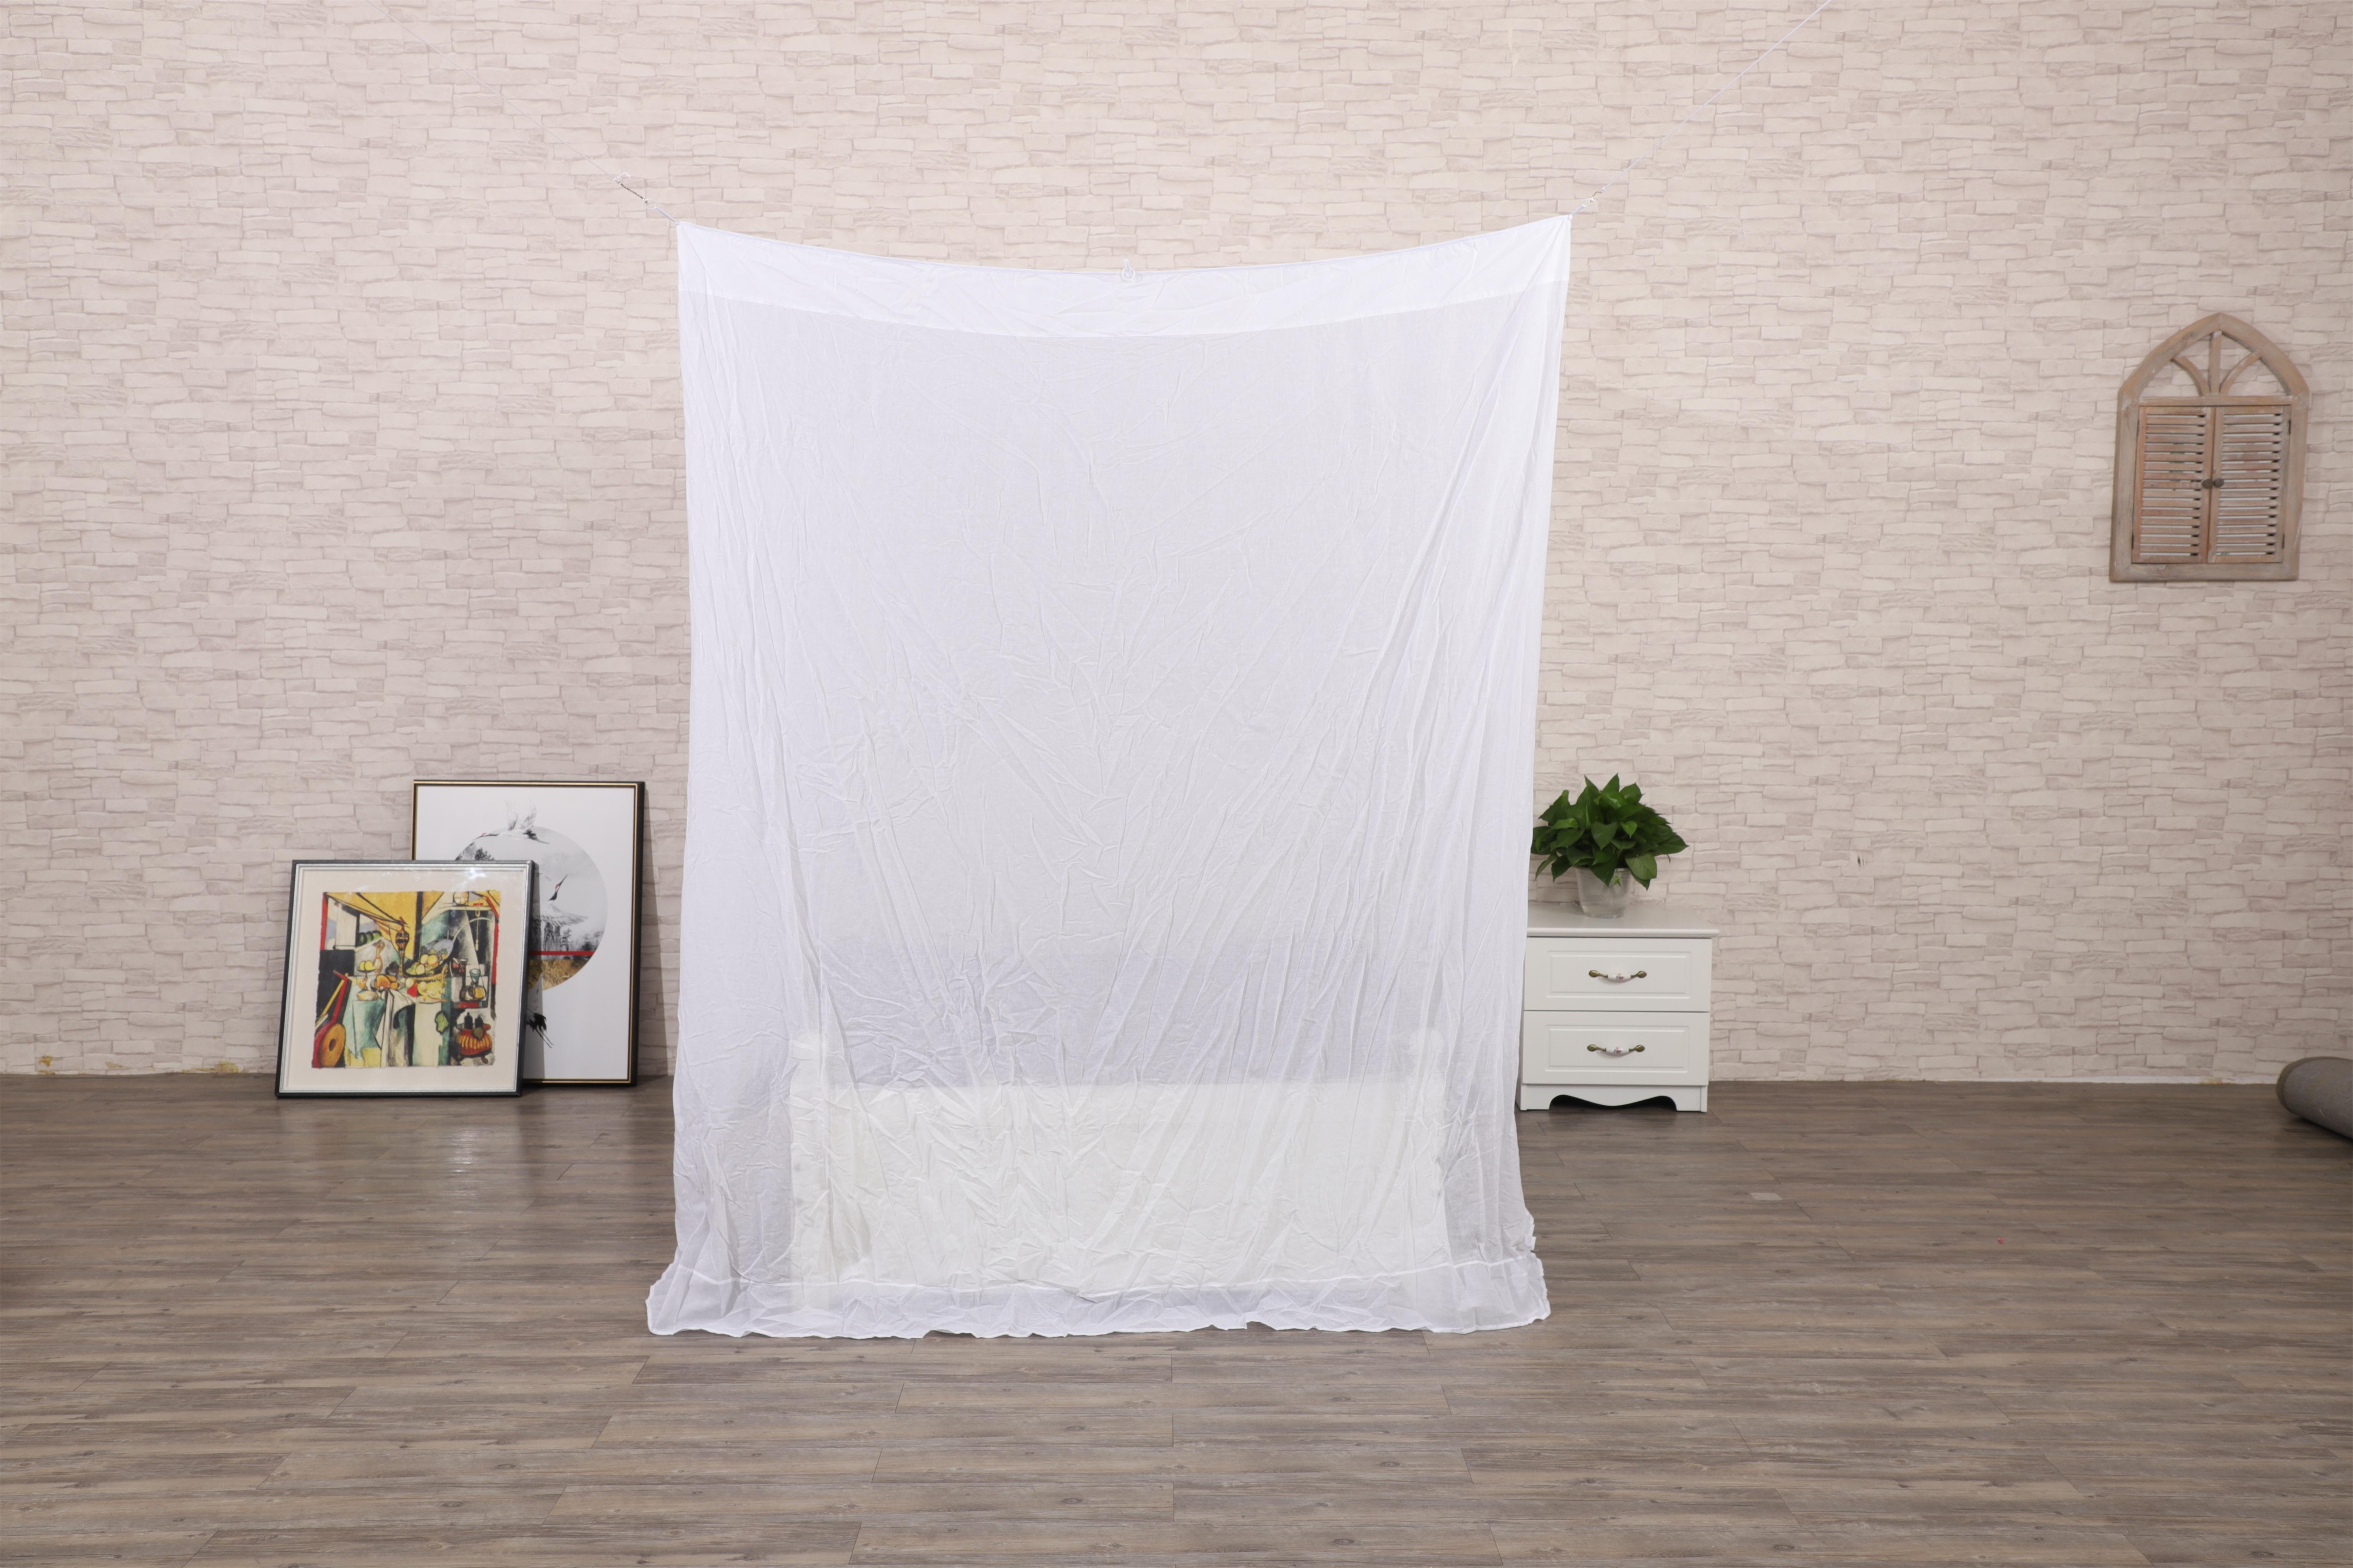 Mosquito Net 4 Openings Insect Protection Repellent